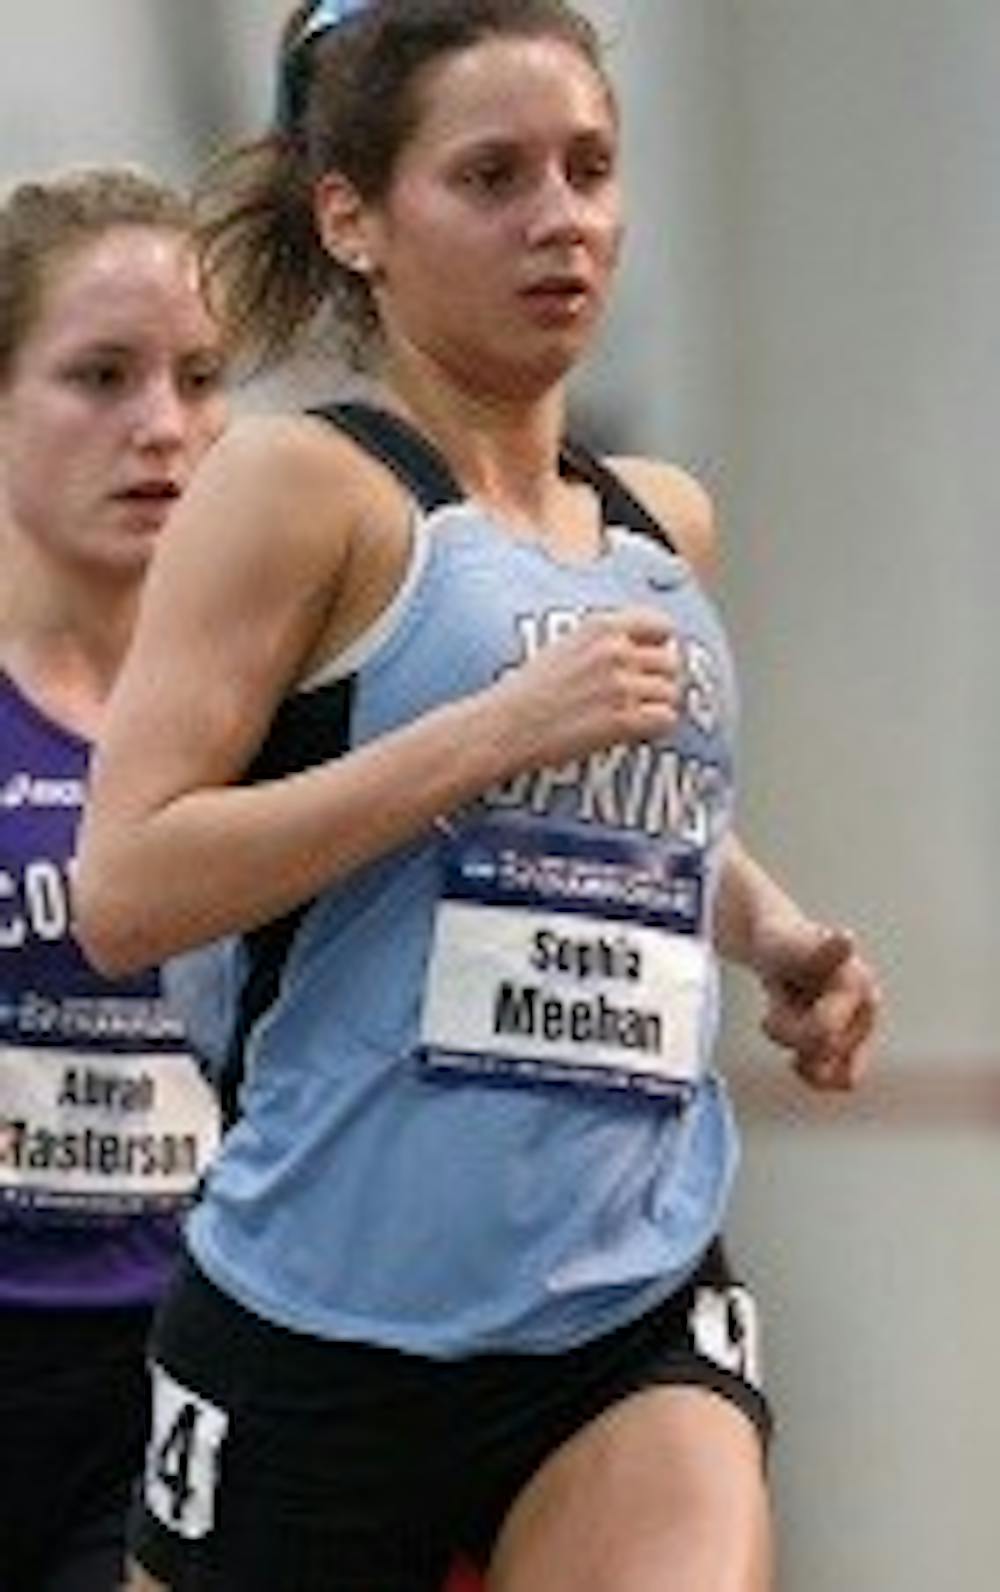 hopkinssports.com
Sophia Meehan will hope to cap her storied career with a championship.